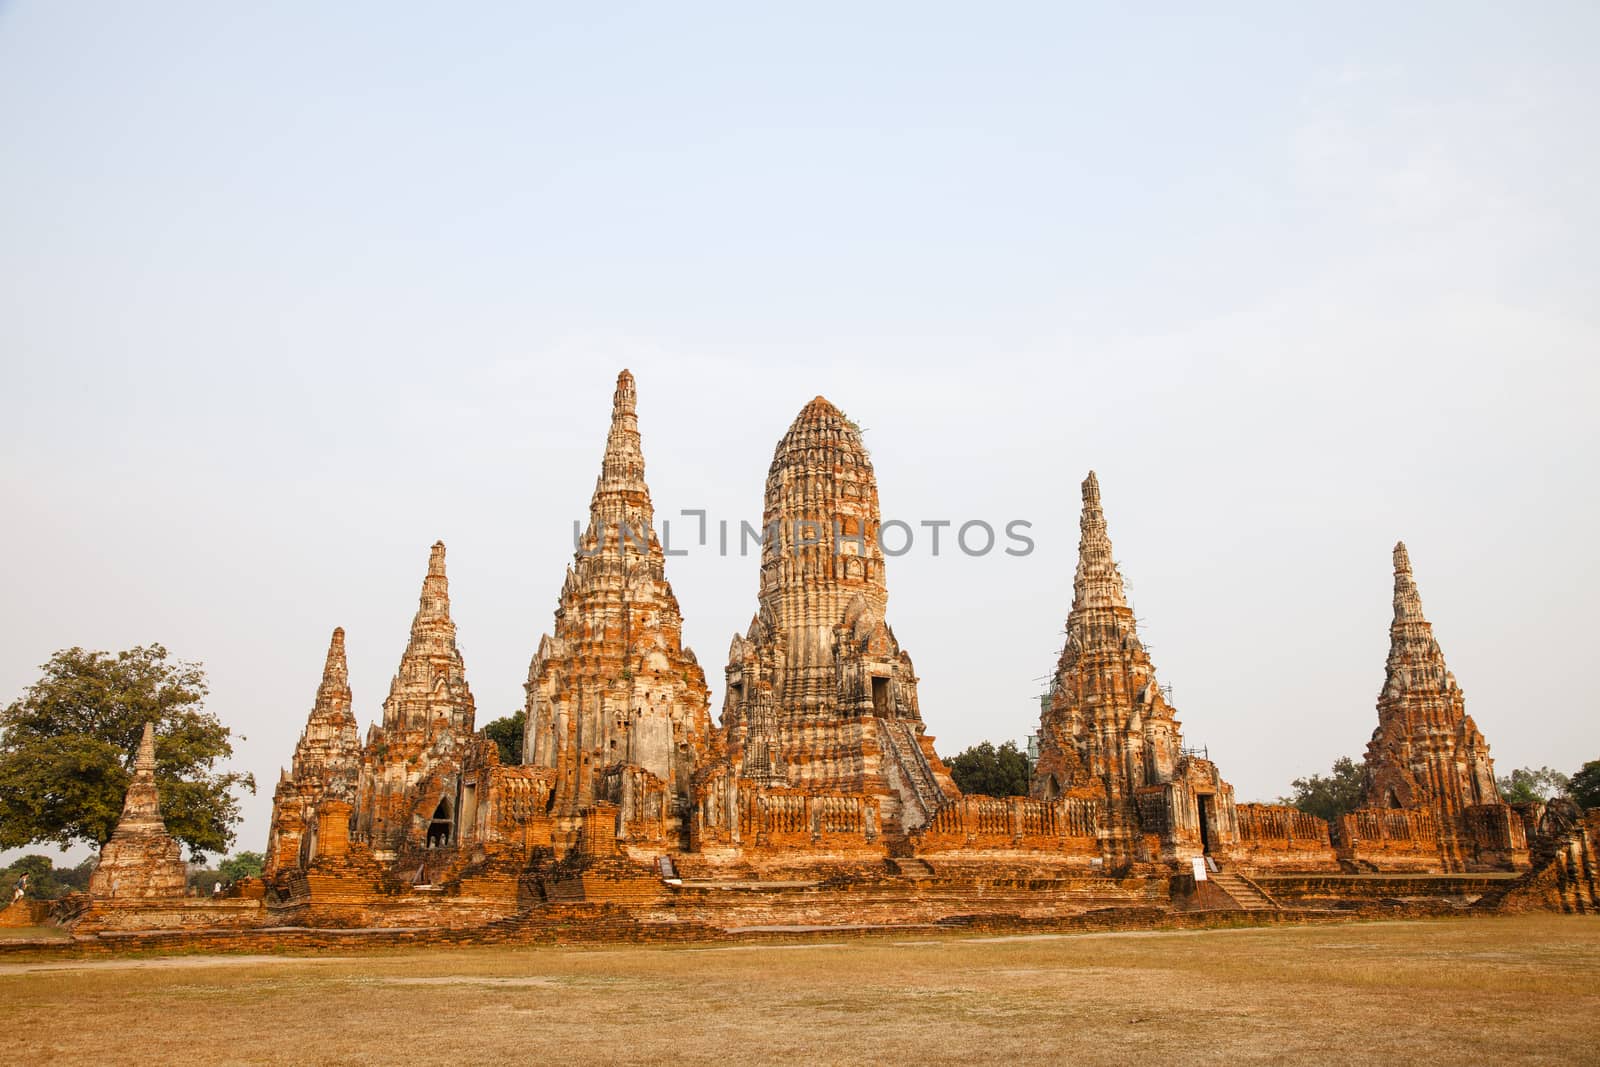 Wat Chaiwatthanaram Buddhist temple in the city of Ayutthaya Historical Park, Thailand. Ayutthaya's best known temples and a major tourist attraction.